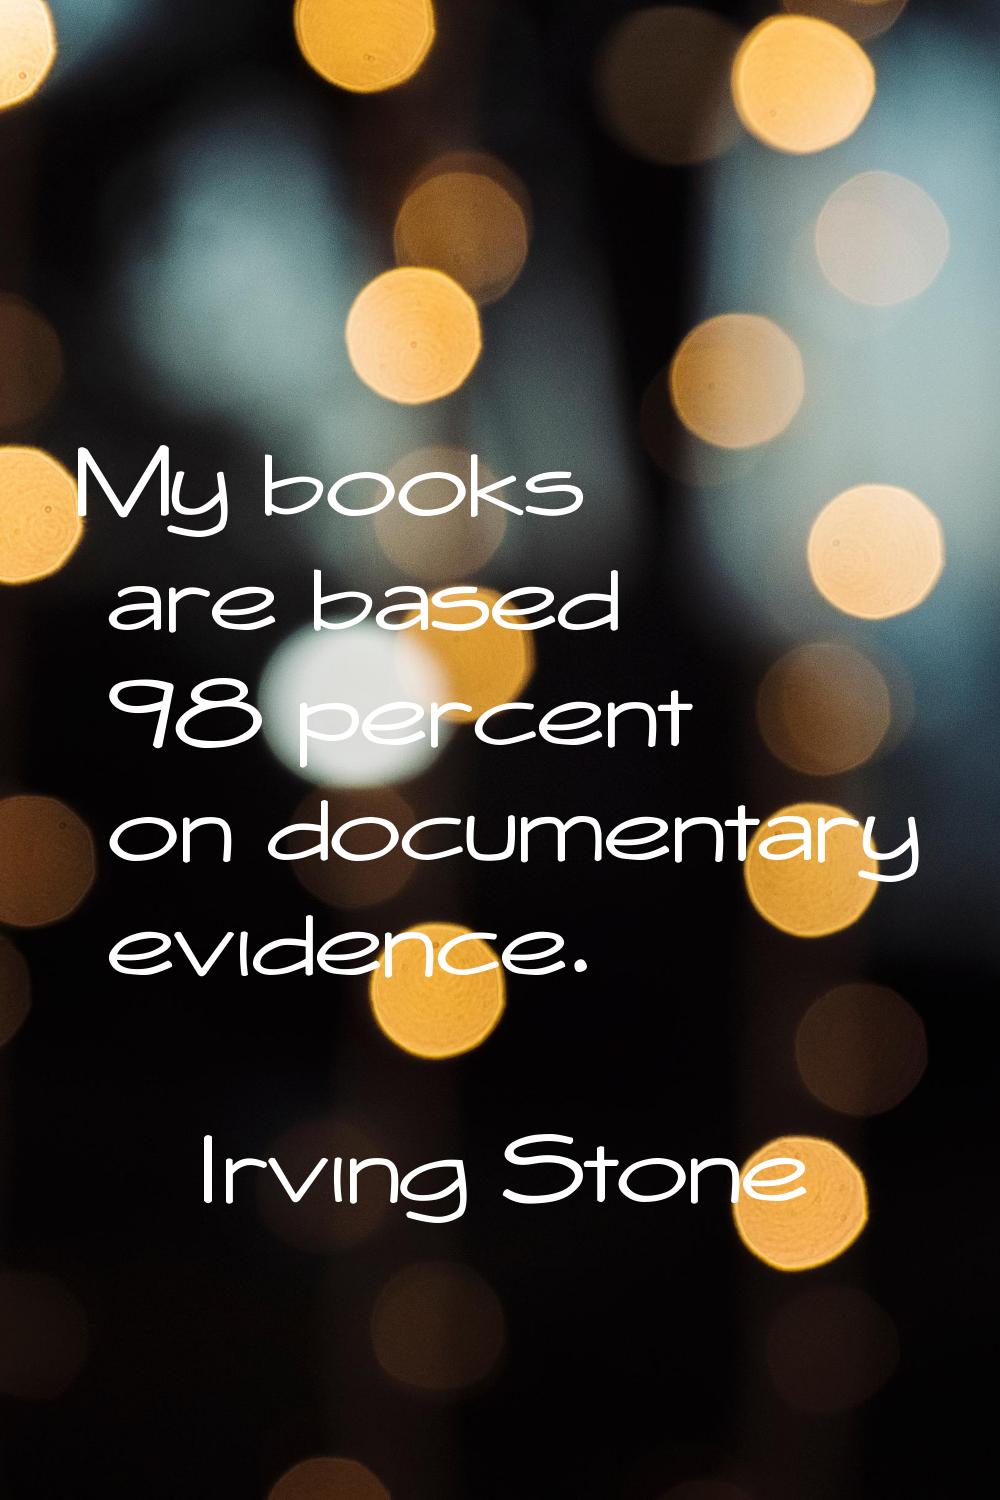 My books are based 98 percent on documentary evidence.